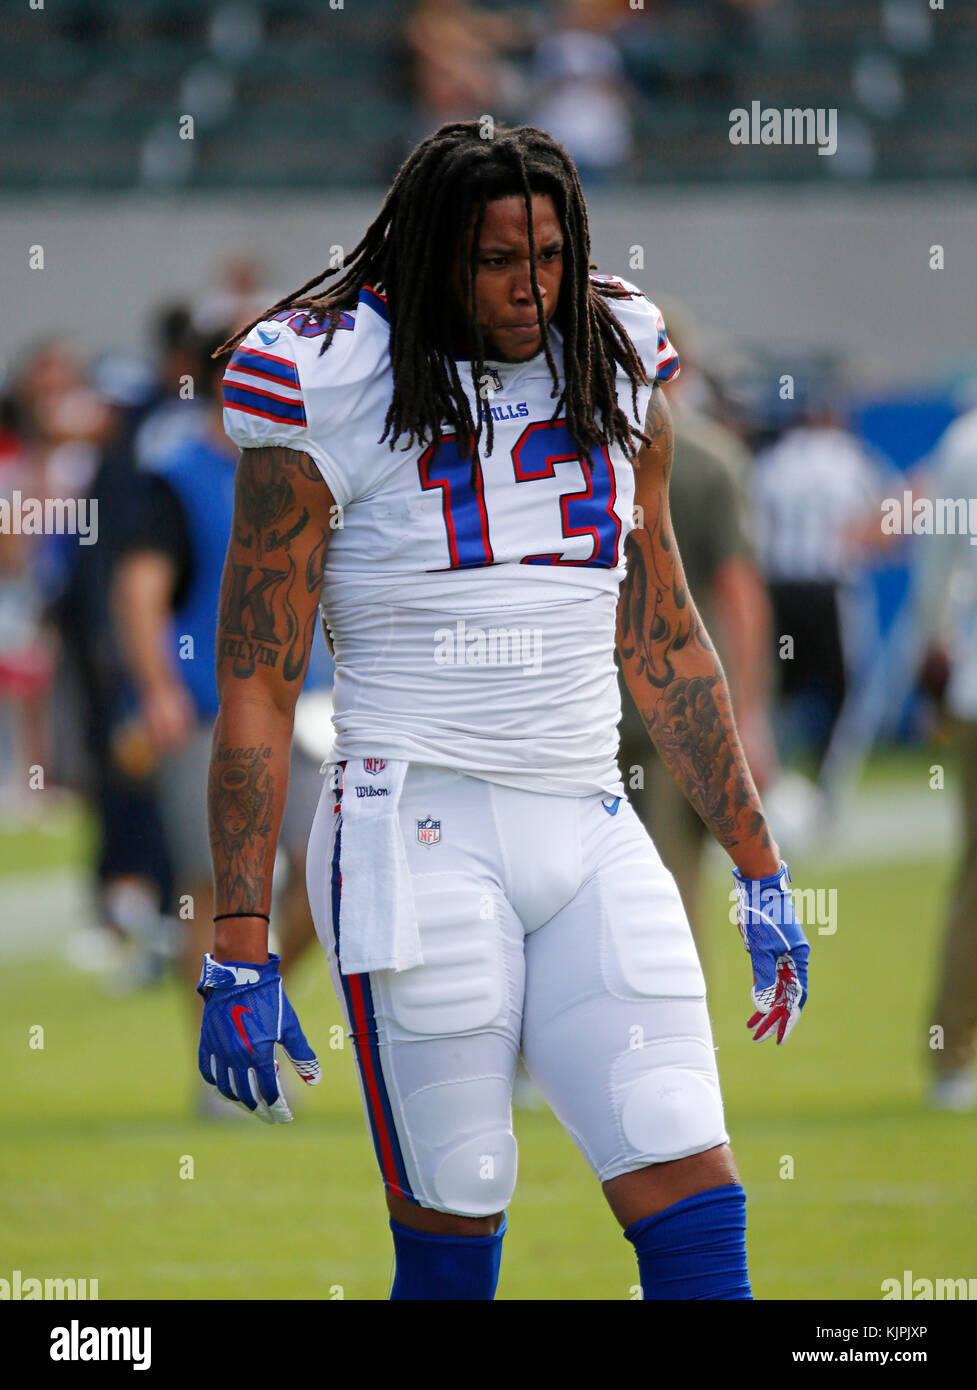 November 19, 2017 Buffalo Bills wide receiver Kelvin Benjamin #13 in action  during the football game between the Buffalo Bills and the Los Angeles  Chargers at the StubHub Center in Carson, California.